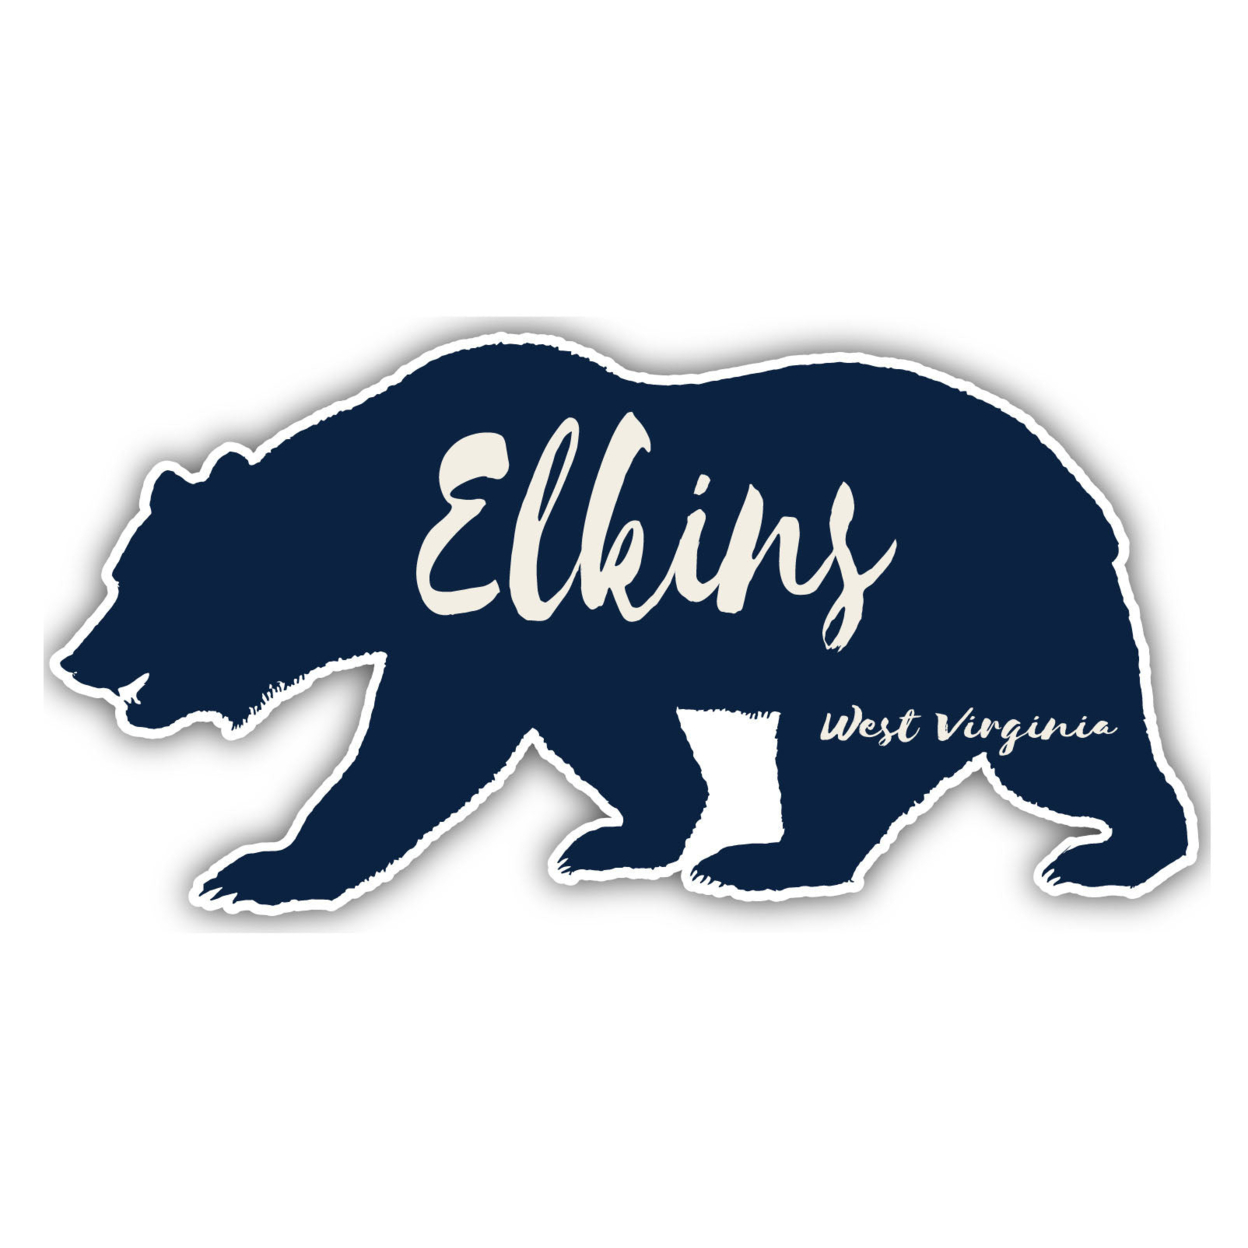 Elkins West Virginia Souvenir Decorative Stickers (Choose Theme And Size) - 4-Pack, 4-Inch, Bear